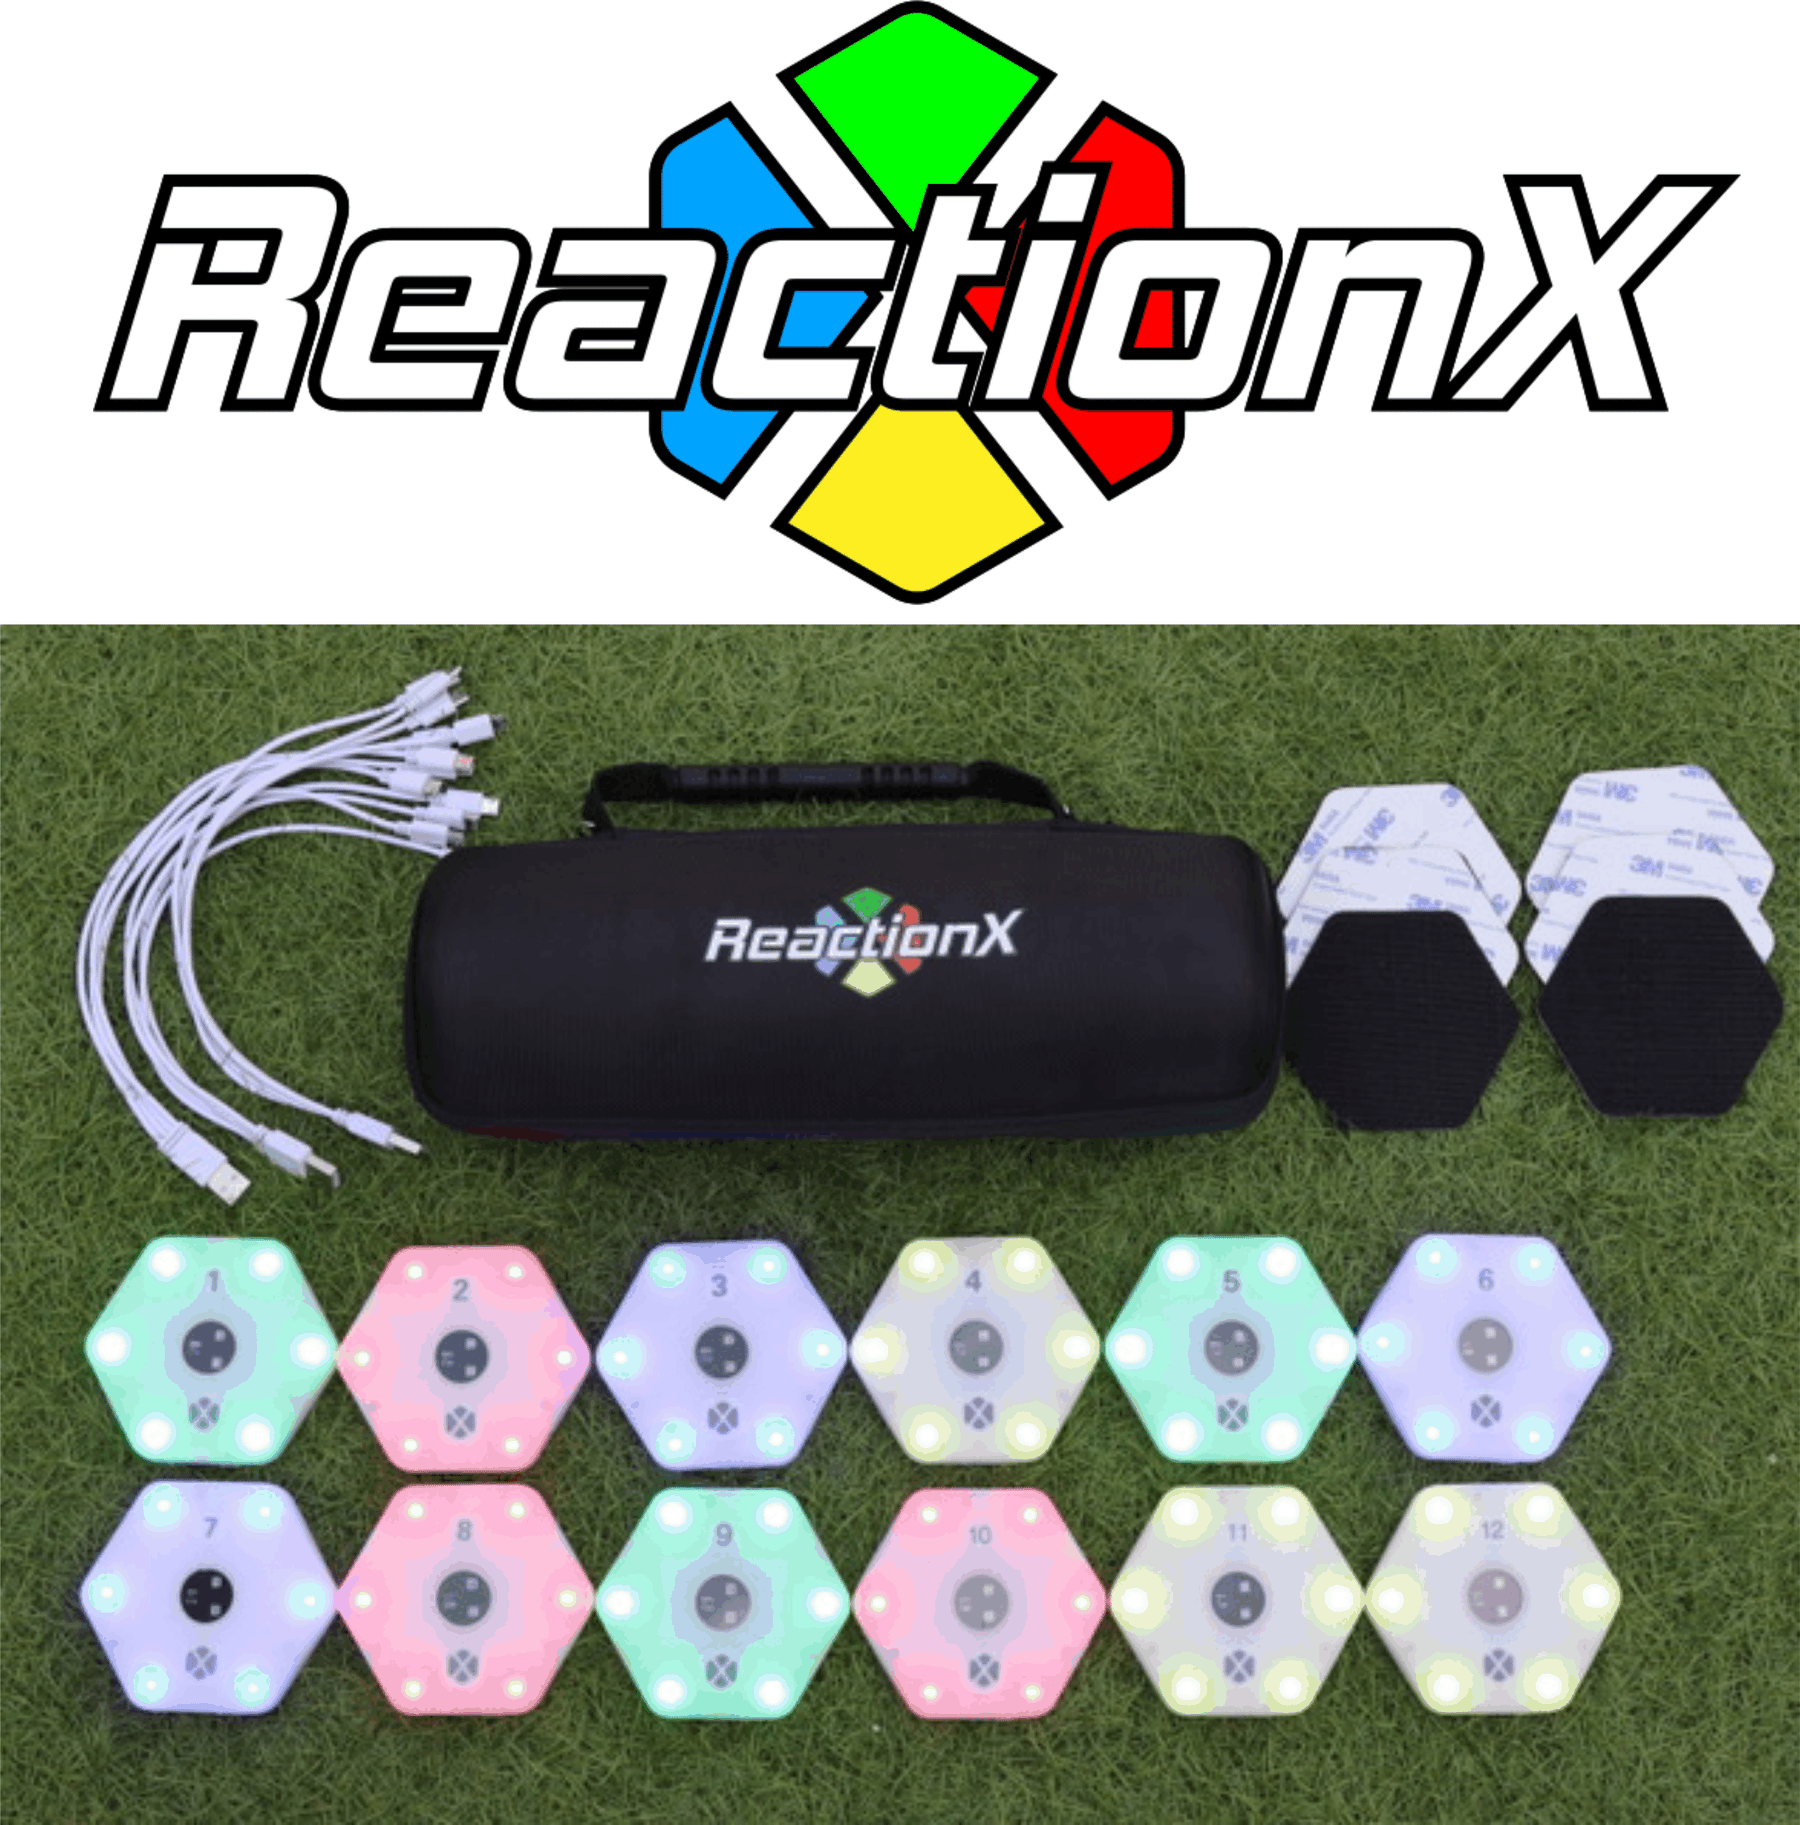 Reaction X - Speed, Agility, Response Training Lamp. Set of 12 + Free 12 pole clamps